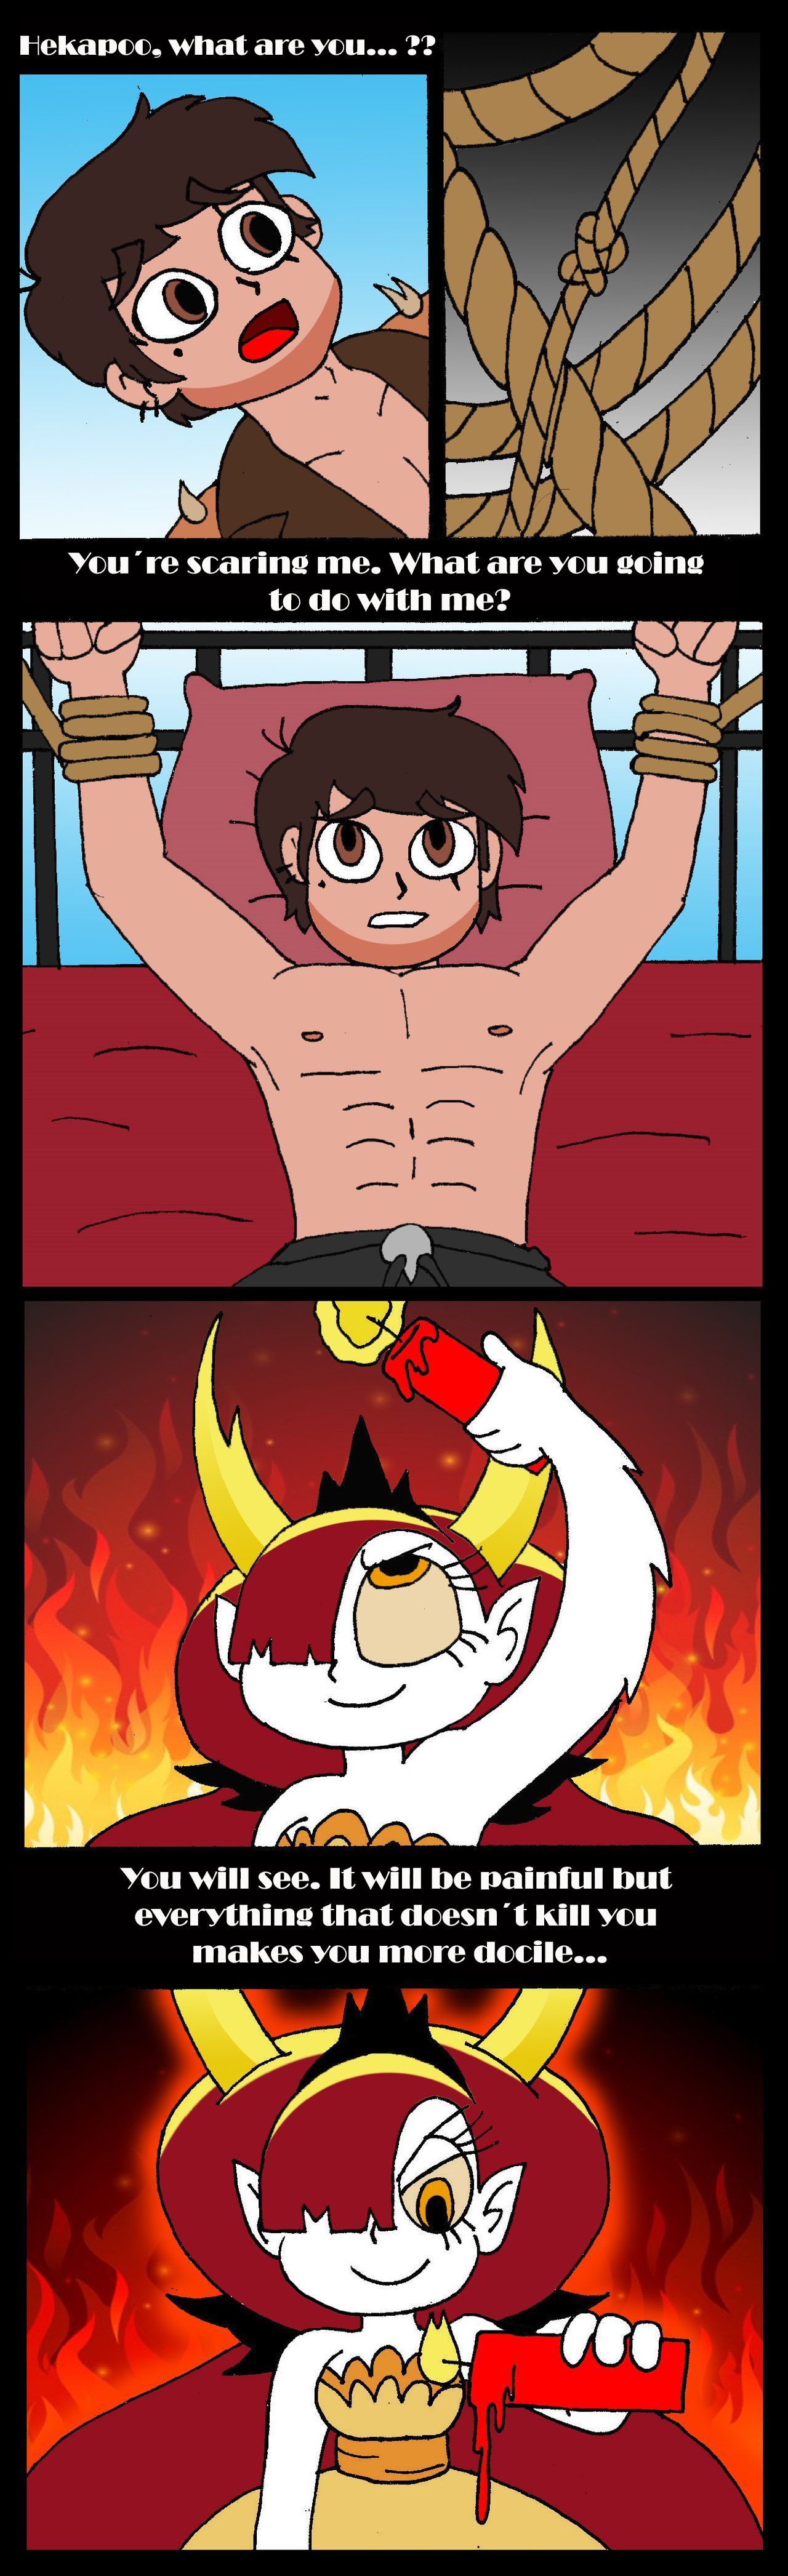 Playing with Fire (Star vs. the Forces of Evil) by Ferozyraptor page 16